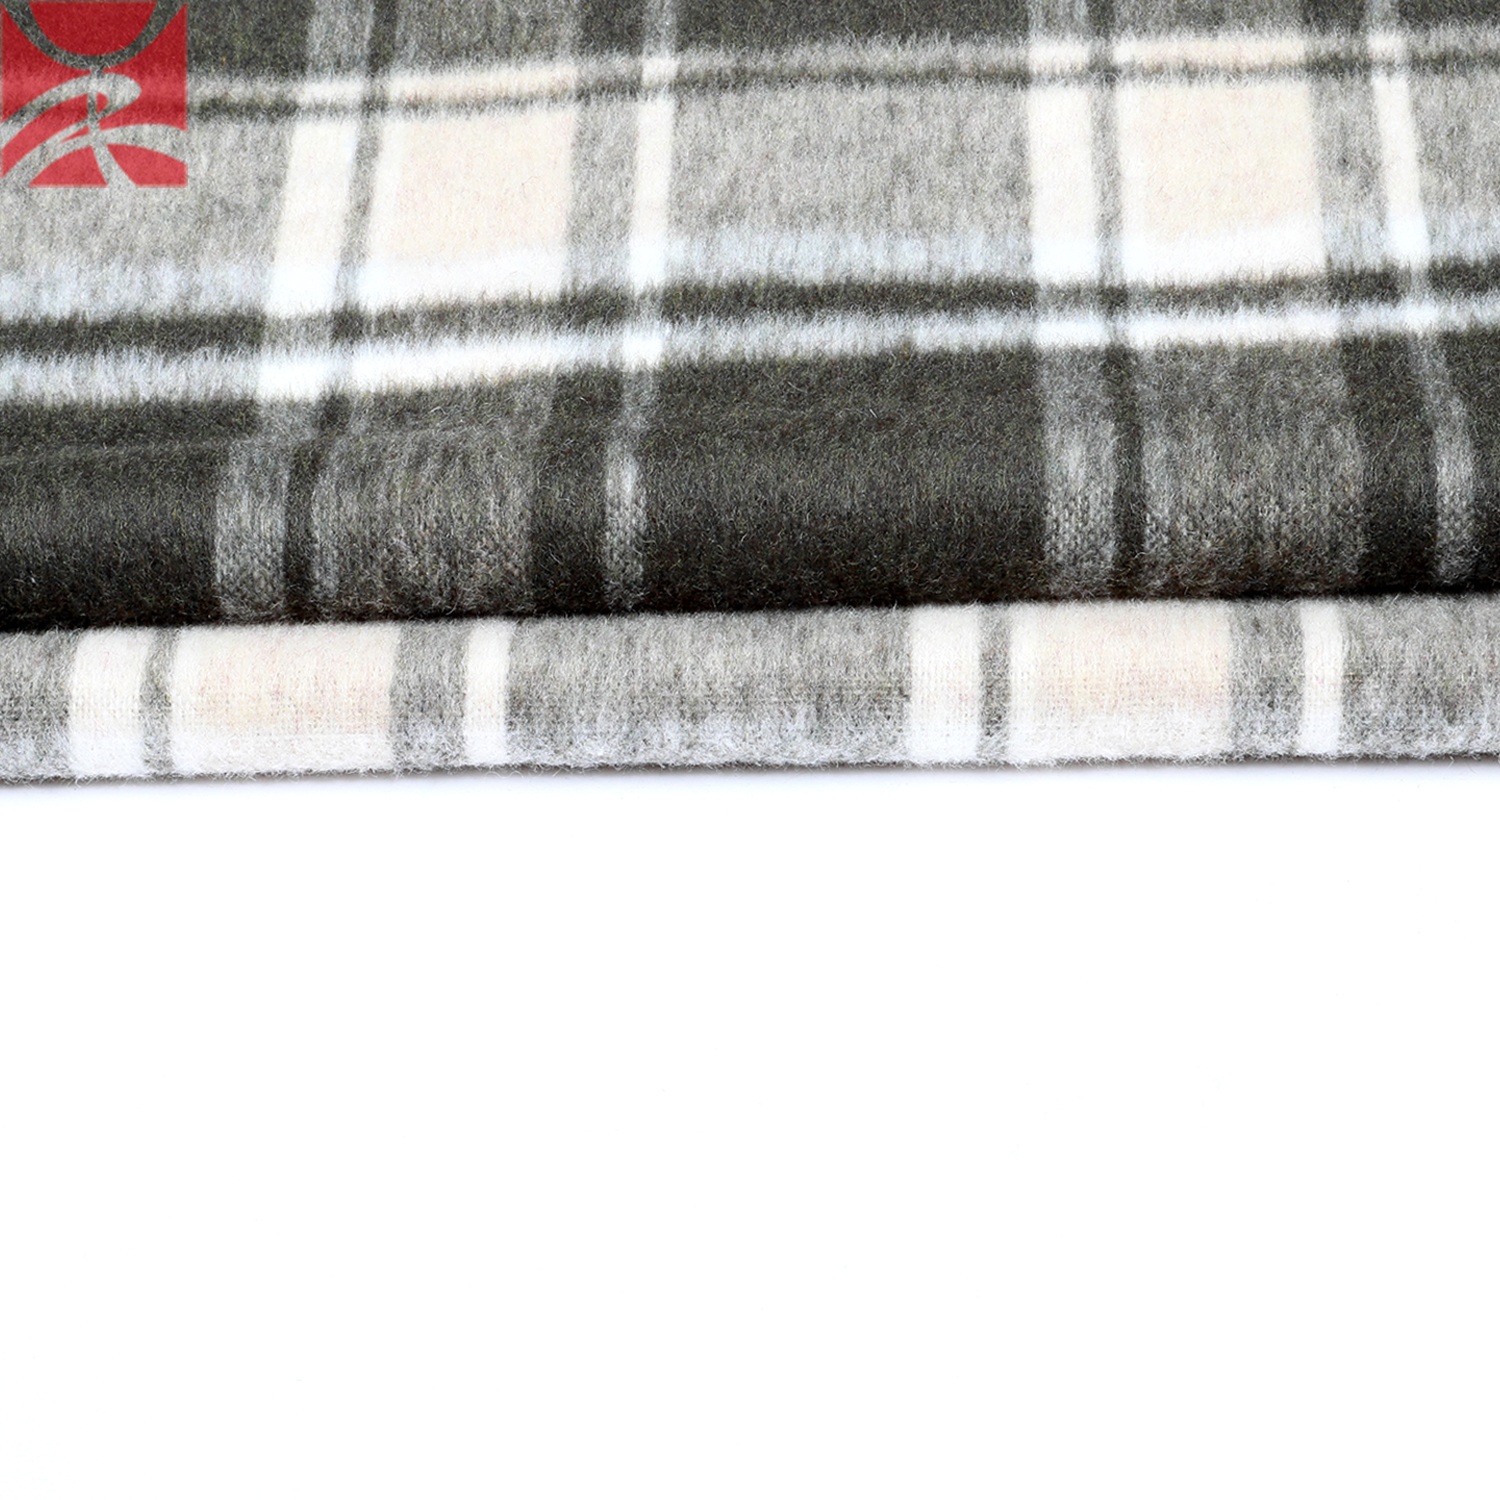 Hot sale woven check plaid wool fleece fabric for winter autumn season overcoat suit clothing1